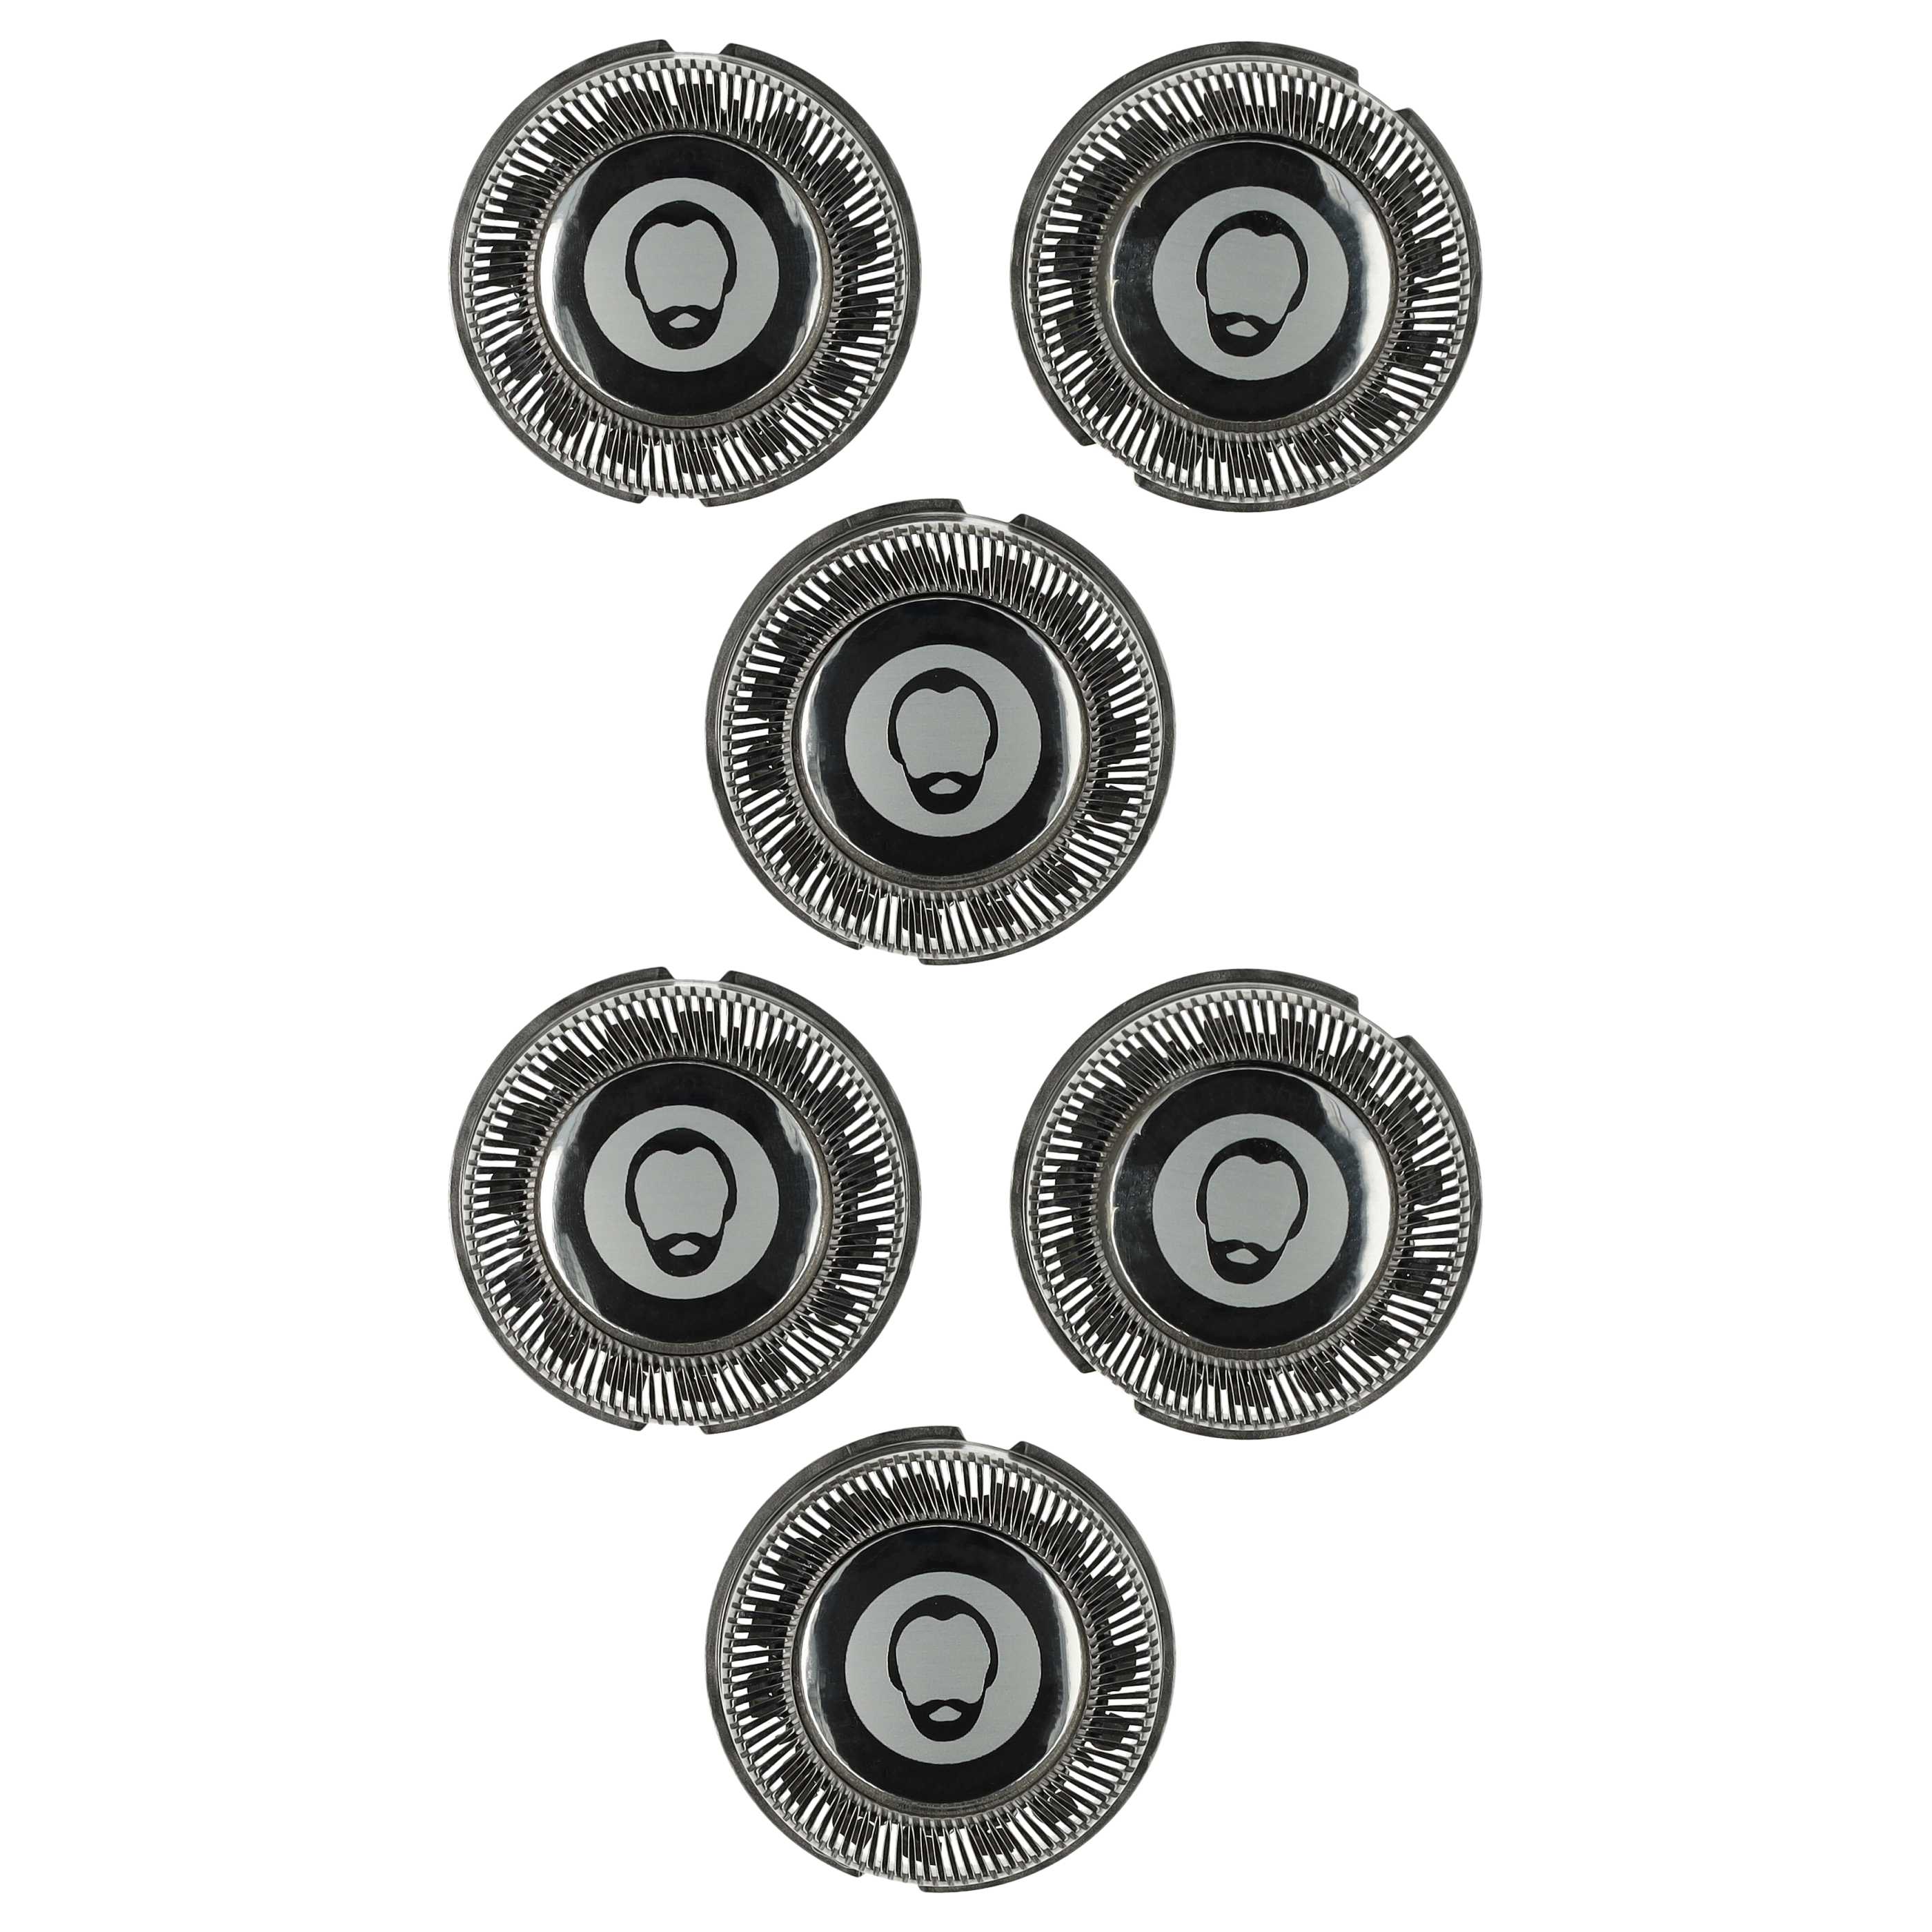 6x shaving head as Replacement for Philips HQ8/53, HQ8/5 for Philips Shaver - Stainless Steel